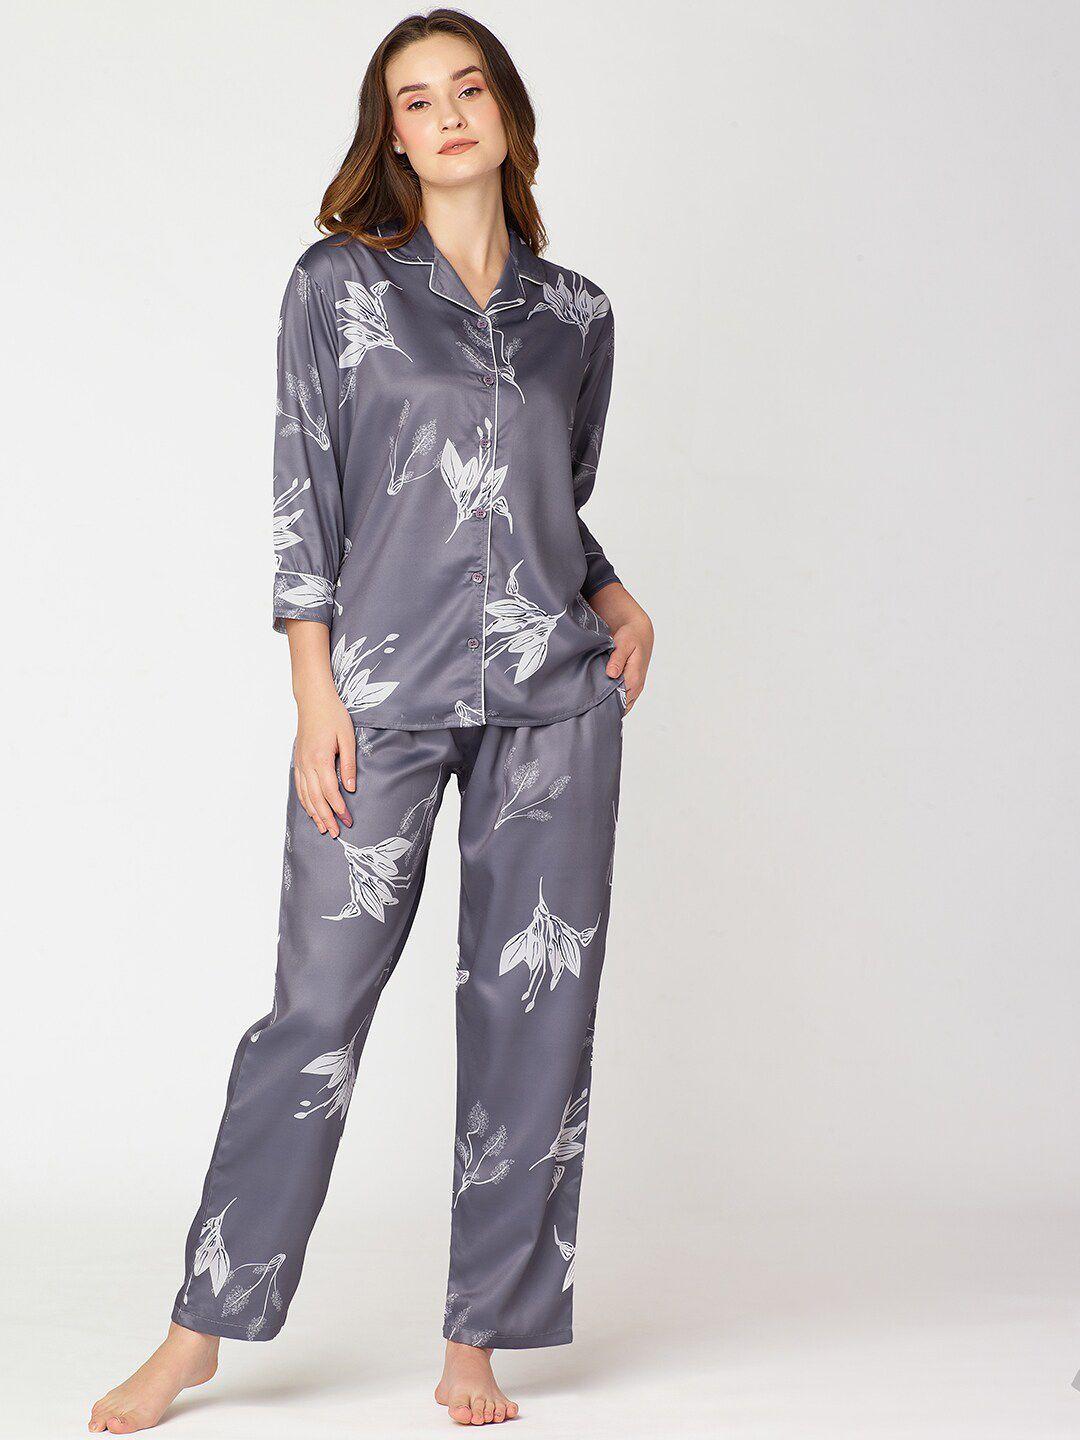 i like me grey & white floral printed satin night suit